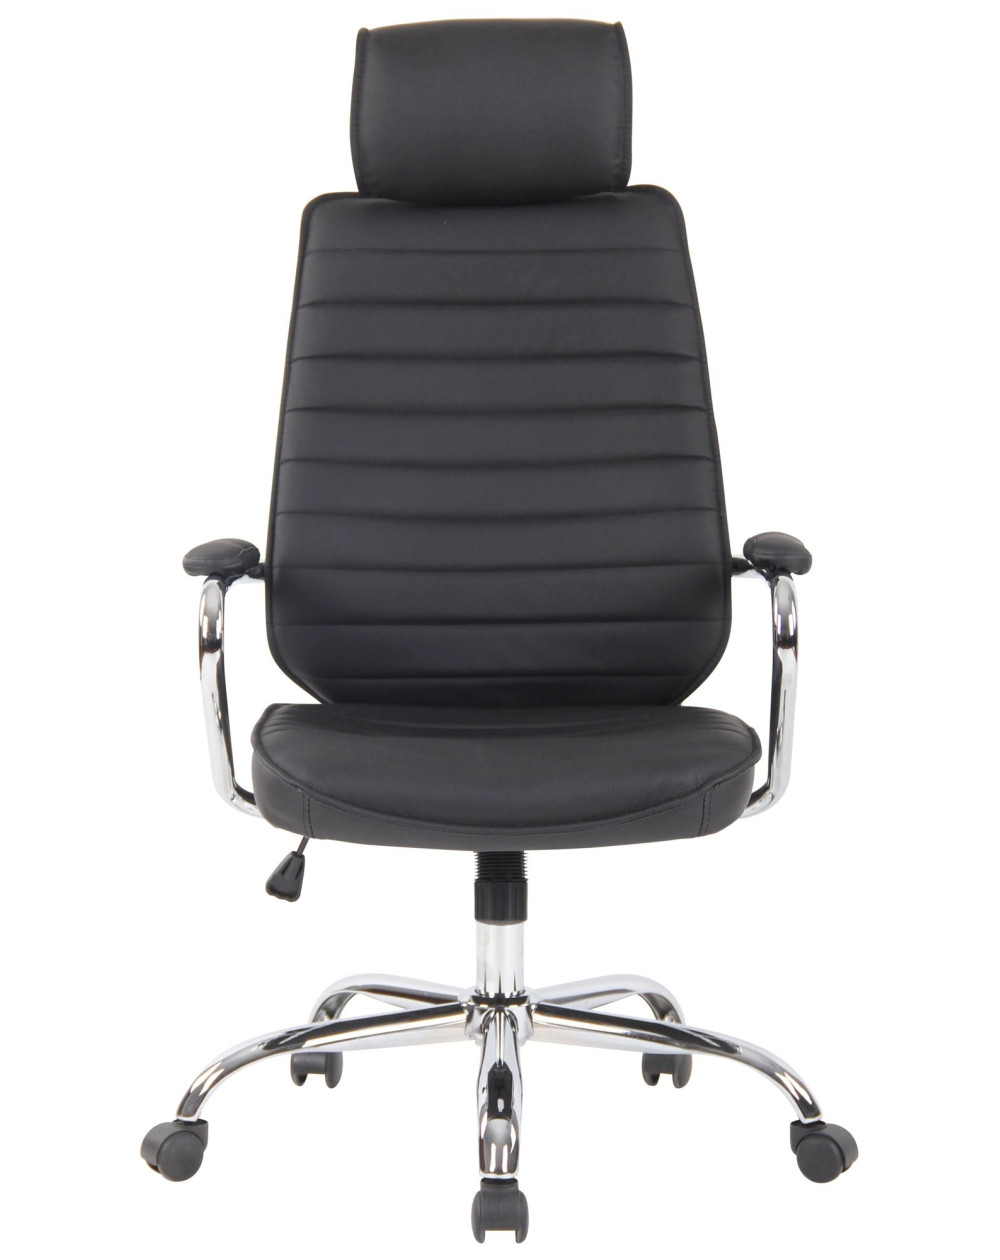 DARK chair DUDECO - Seat material: Synthetic leather and double padding
Structure material: Aluminum
Backrest: Ergonomic and rec